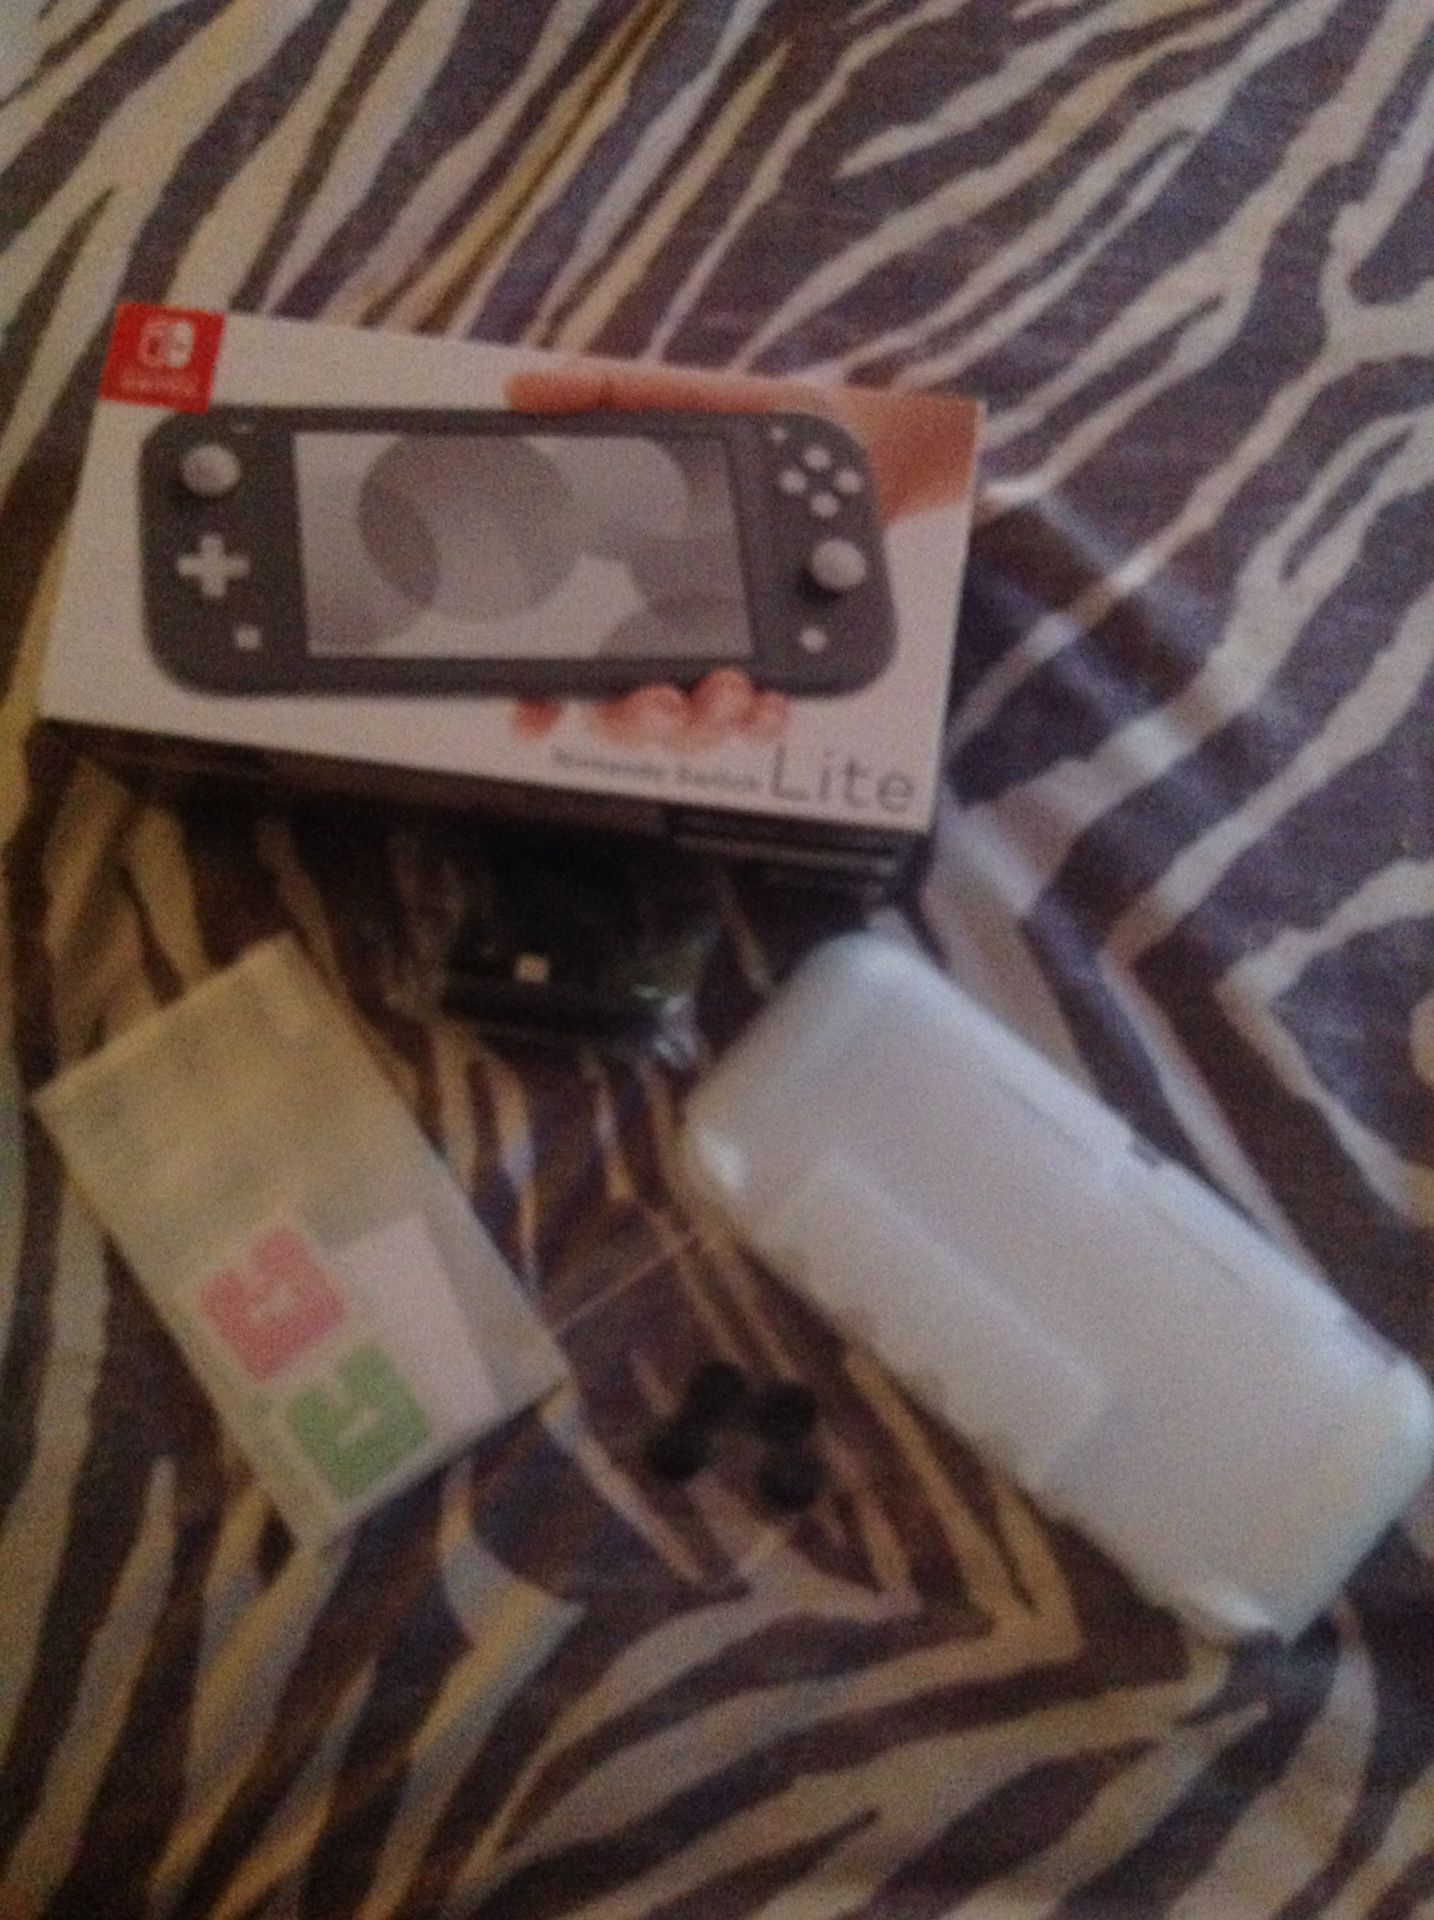 Unopened Nintendo Switch Lite (color grey) with accessories included